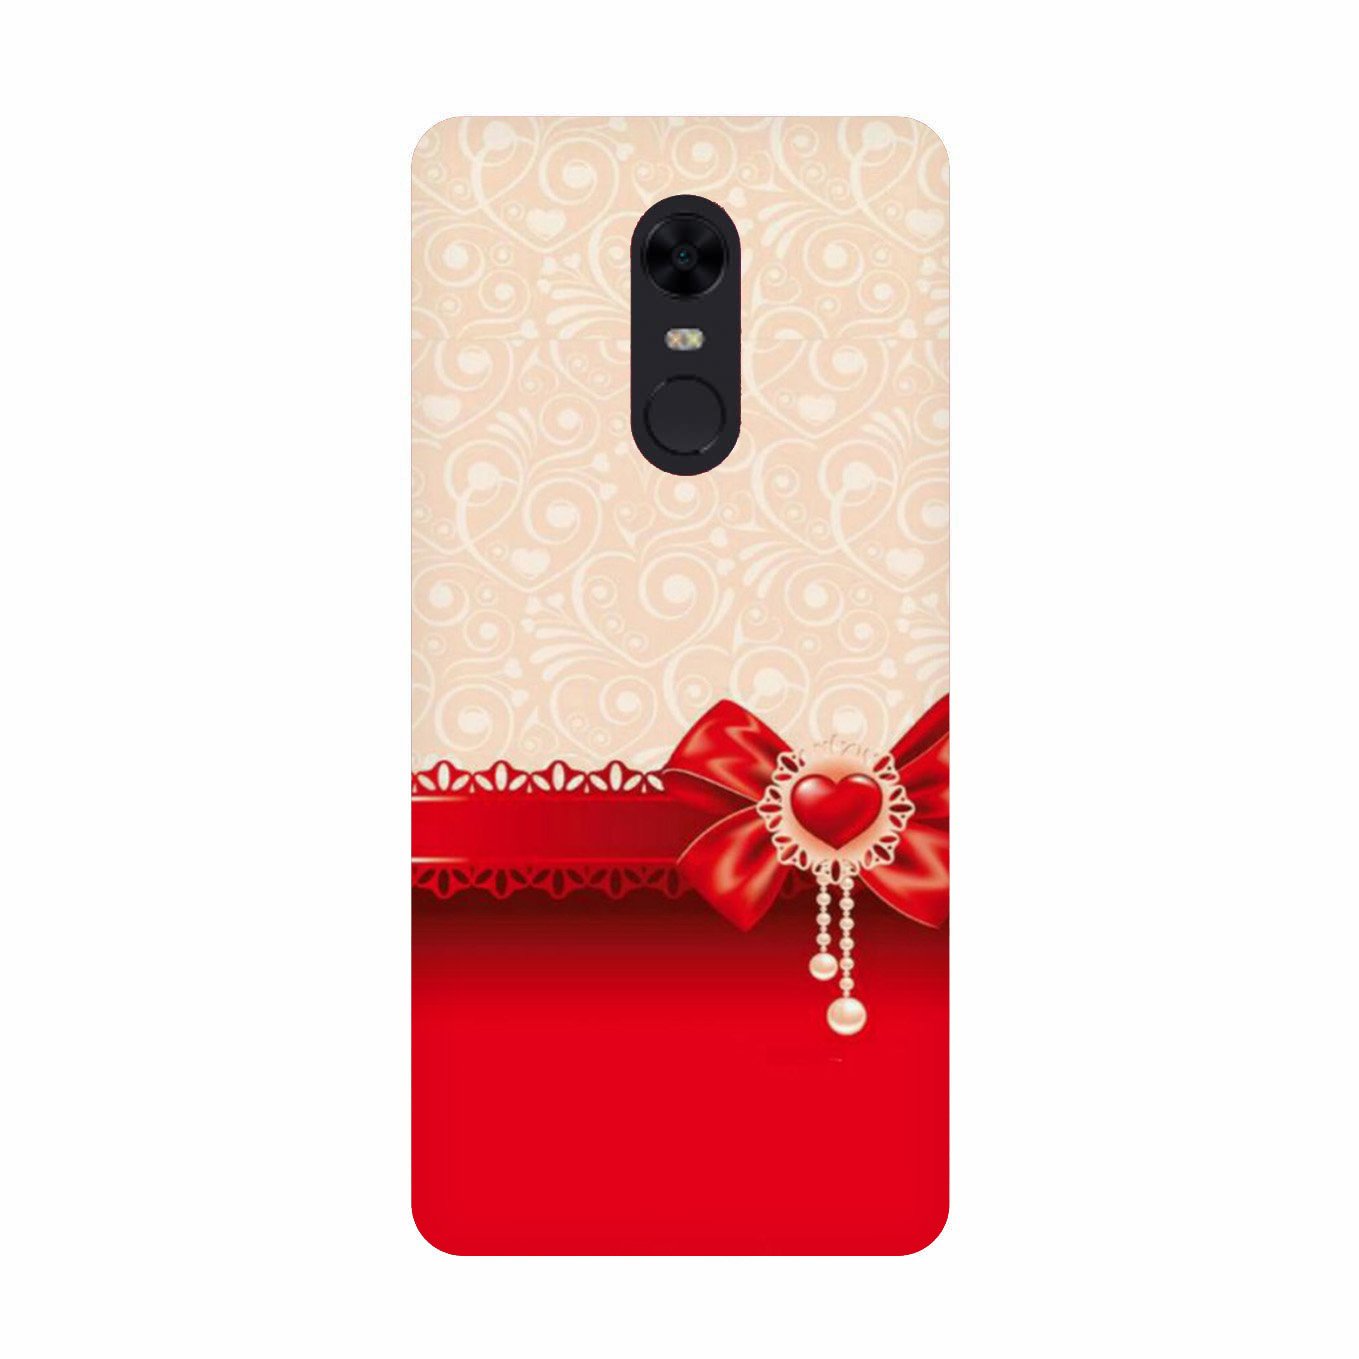 Gift Wrap3 Case for Redmi Note 5